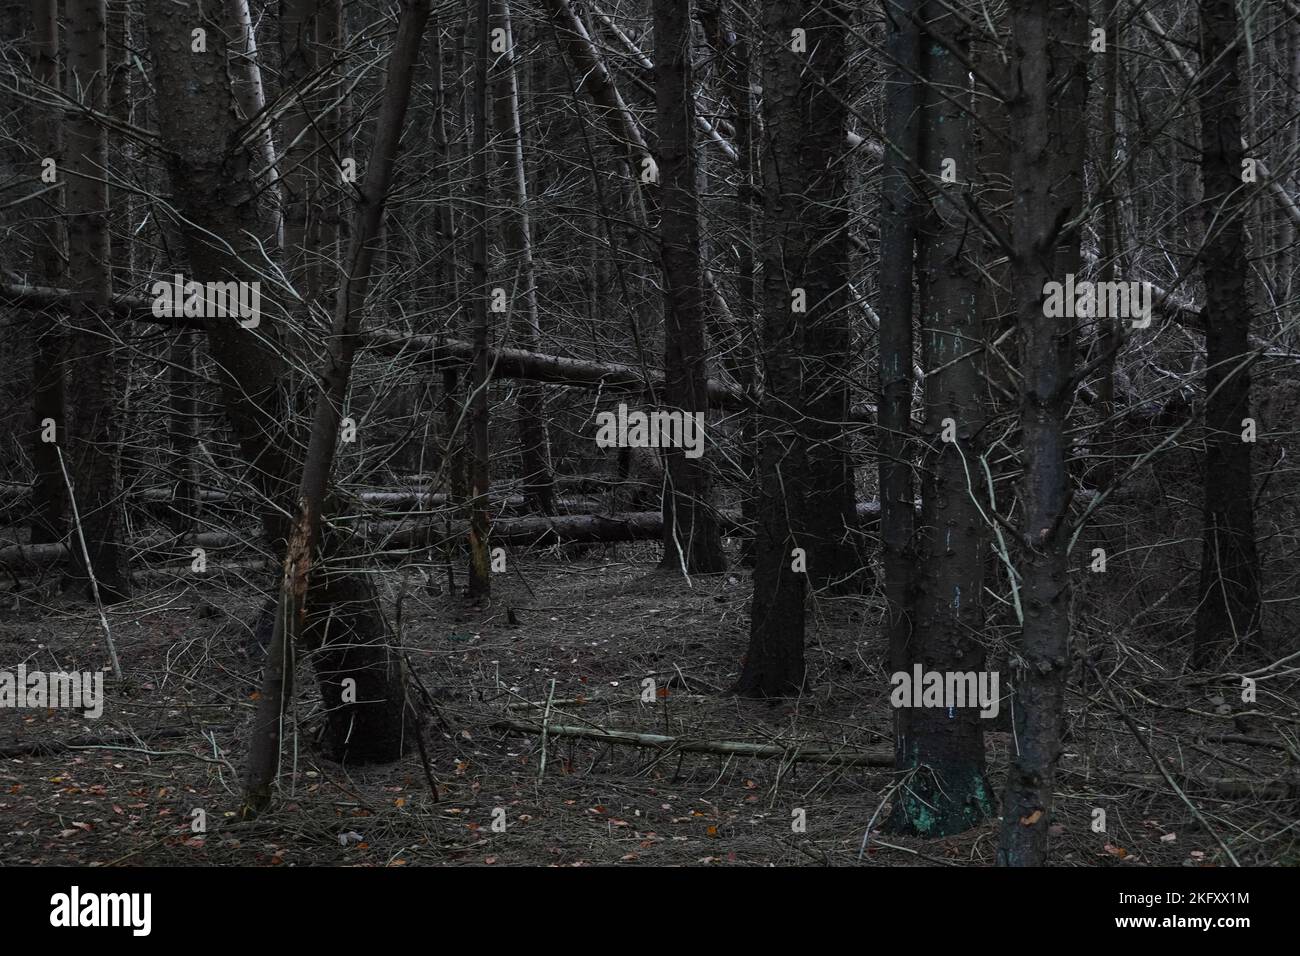 Dark, gloomy pine forest with many fallen trees Stock Photo